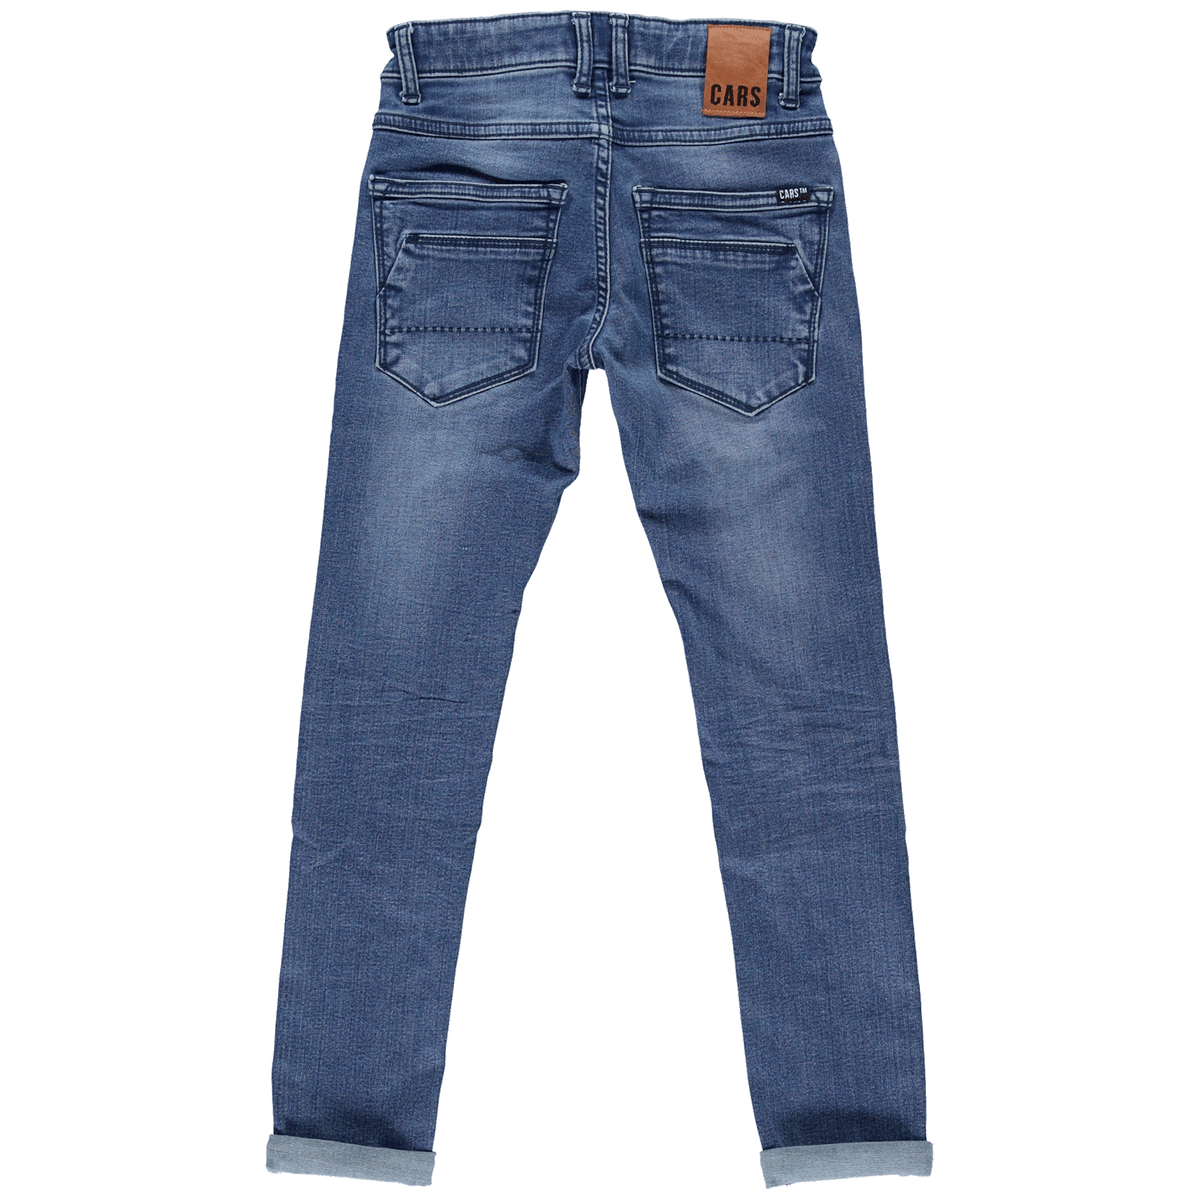 Jungen Jeans Hose Patcon Soft Stone Used